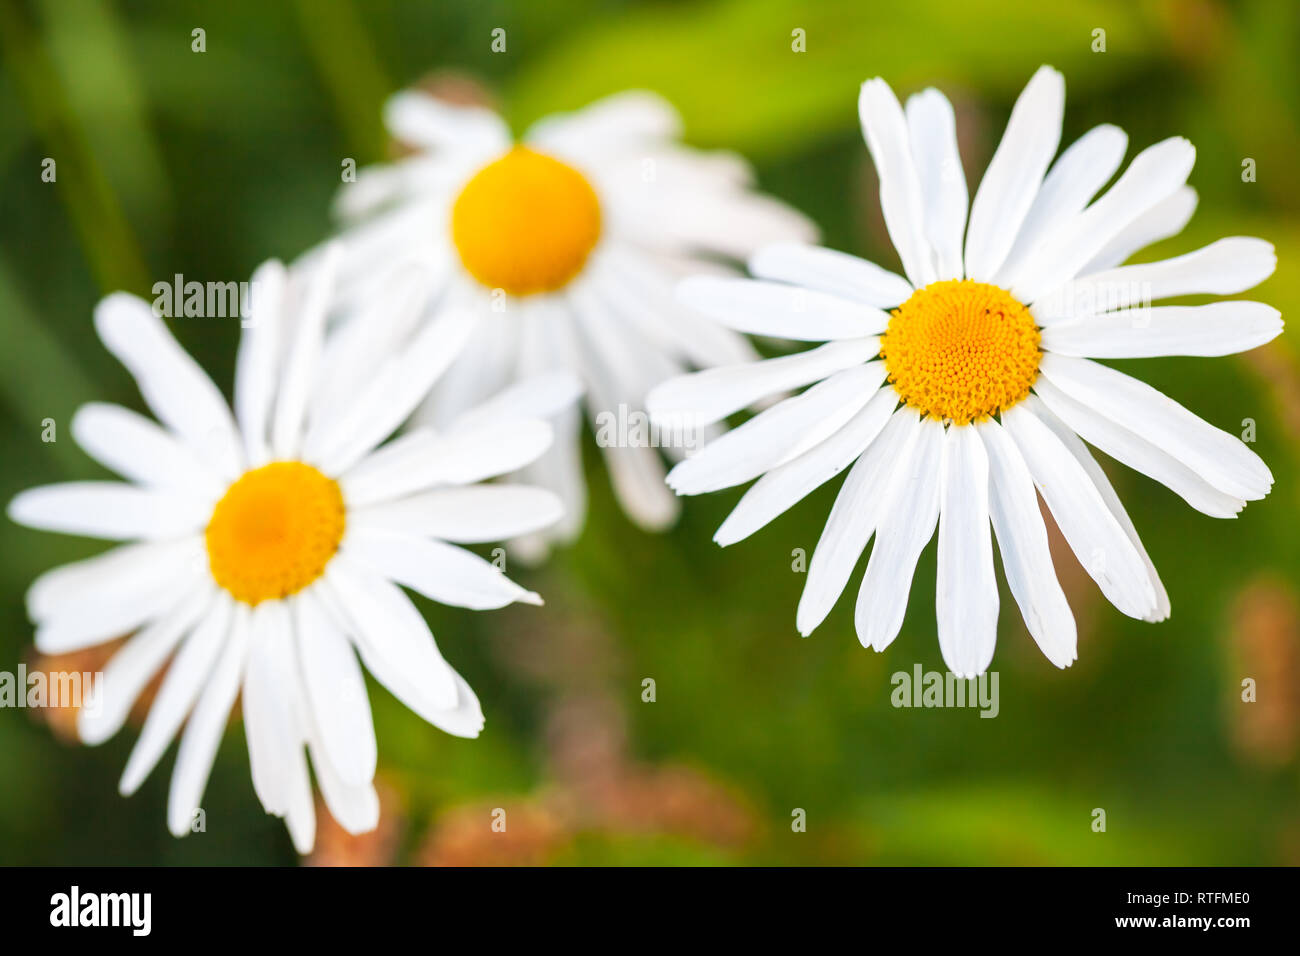 White daisies close up photo over blurred green background Stock Photo